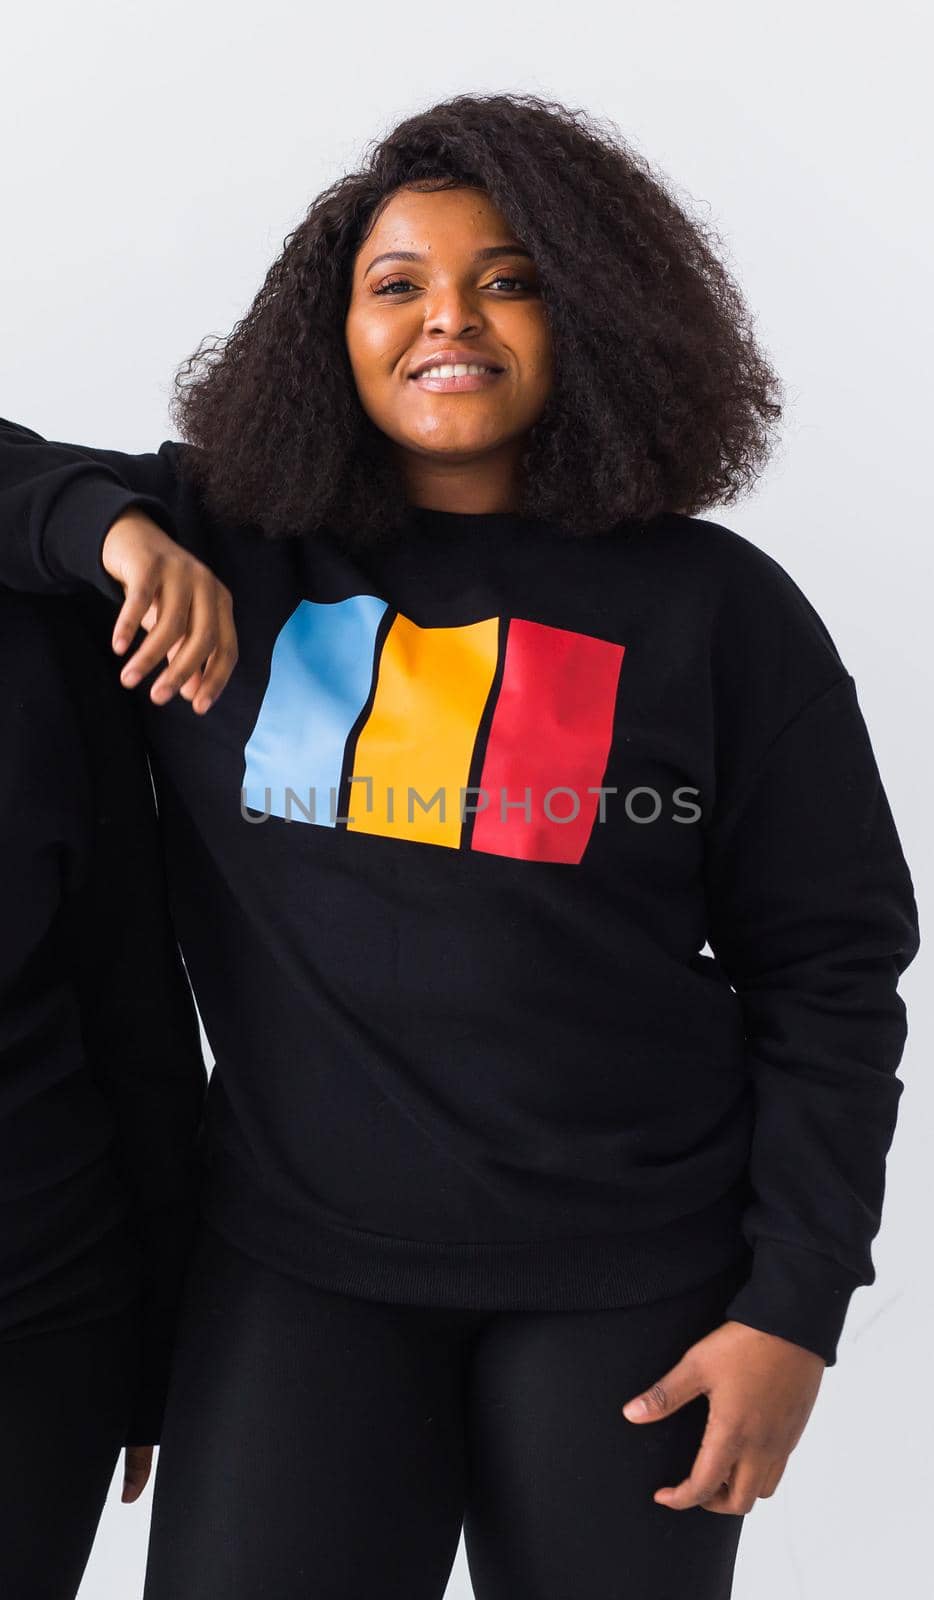 Young beautiful african american girl with an afro hairstyle. Portrait on white background. Girl looking at camera